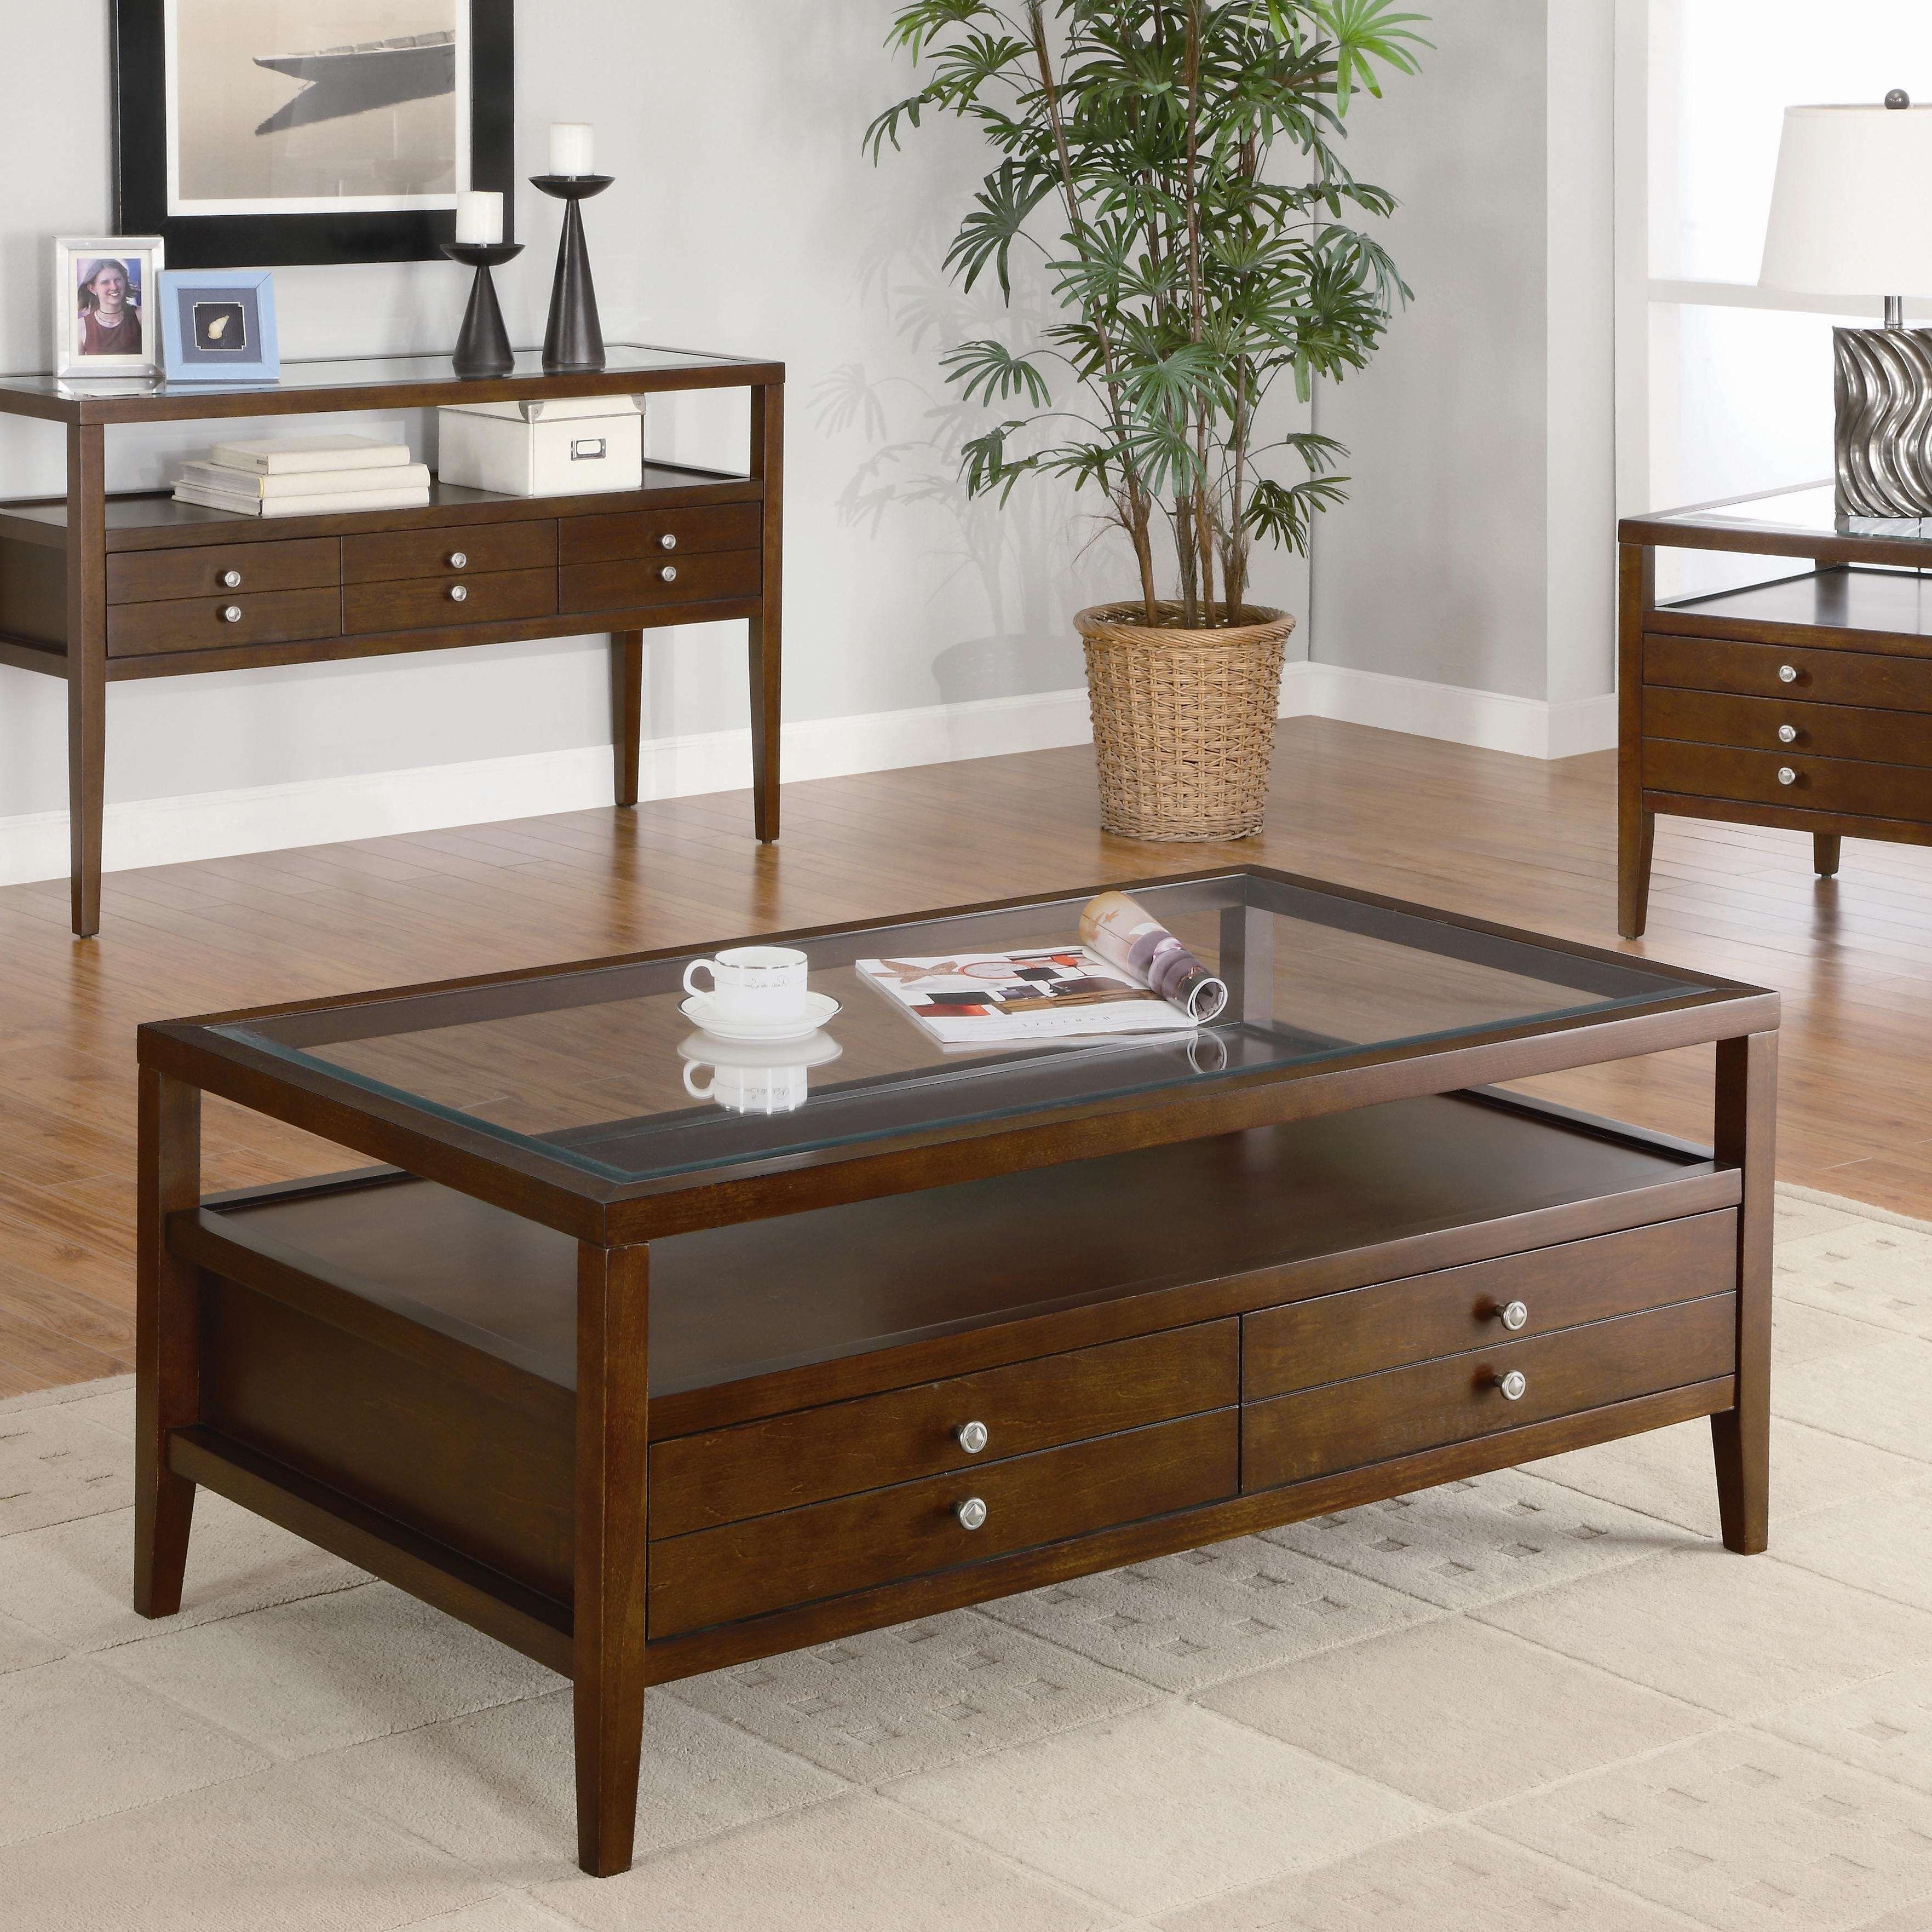 Current Dark Brown Coffee Tables In Living Room : Living Room Furniture Modern Coffee Tables And (Gallery 18 of 20)